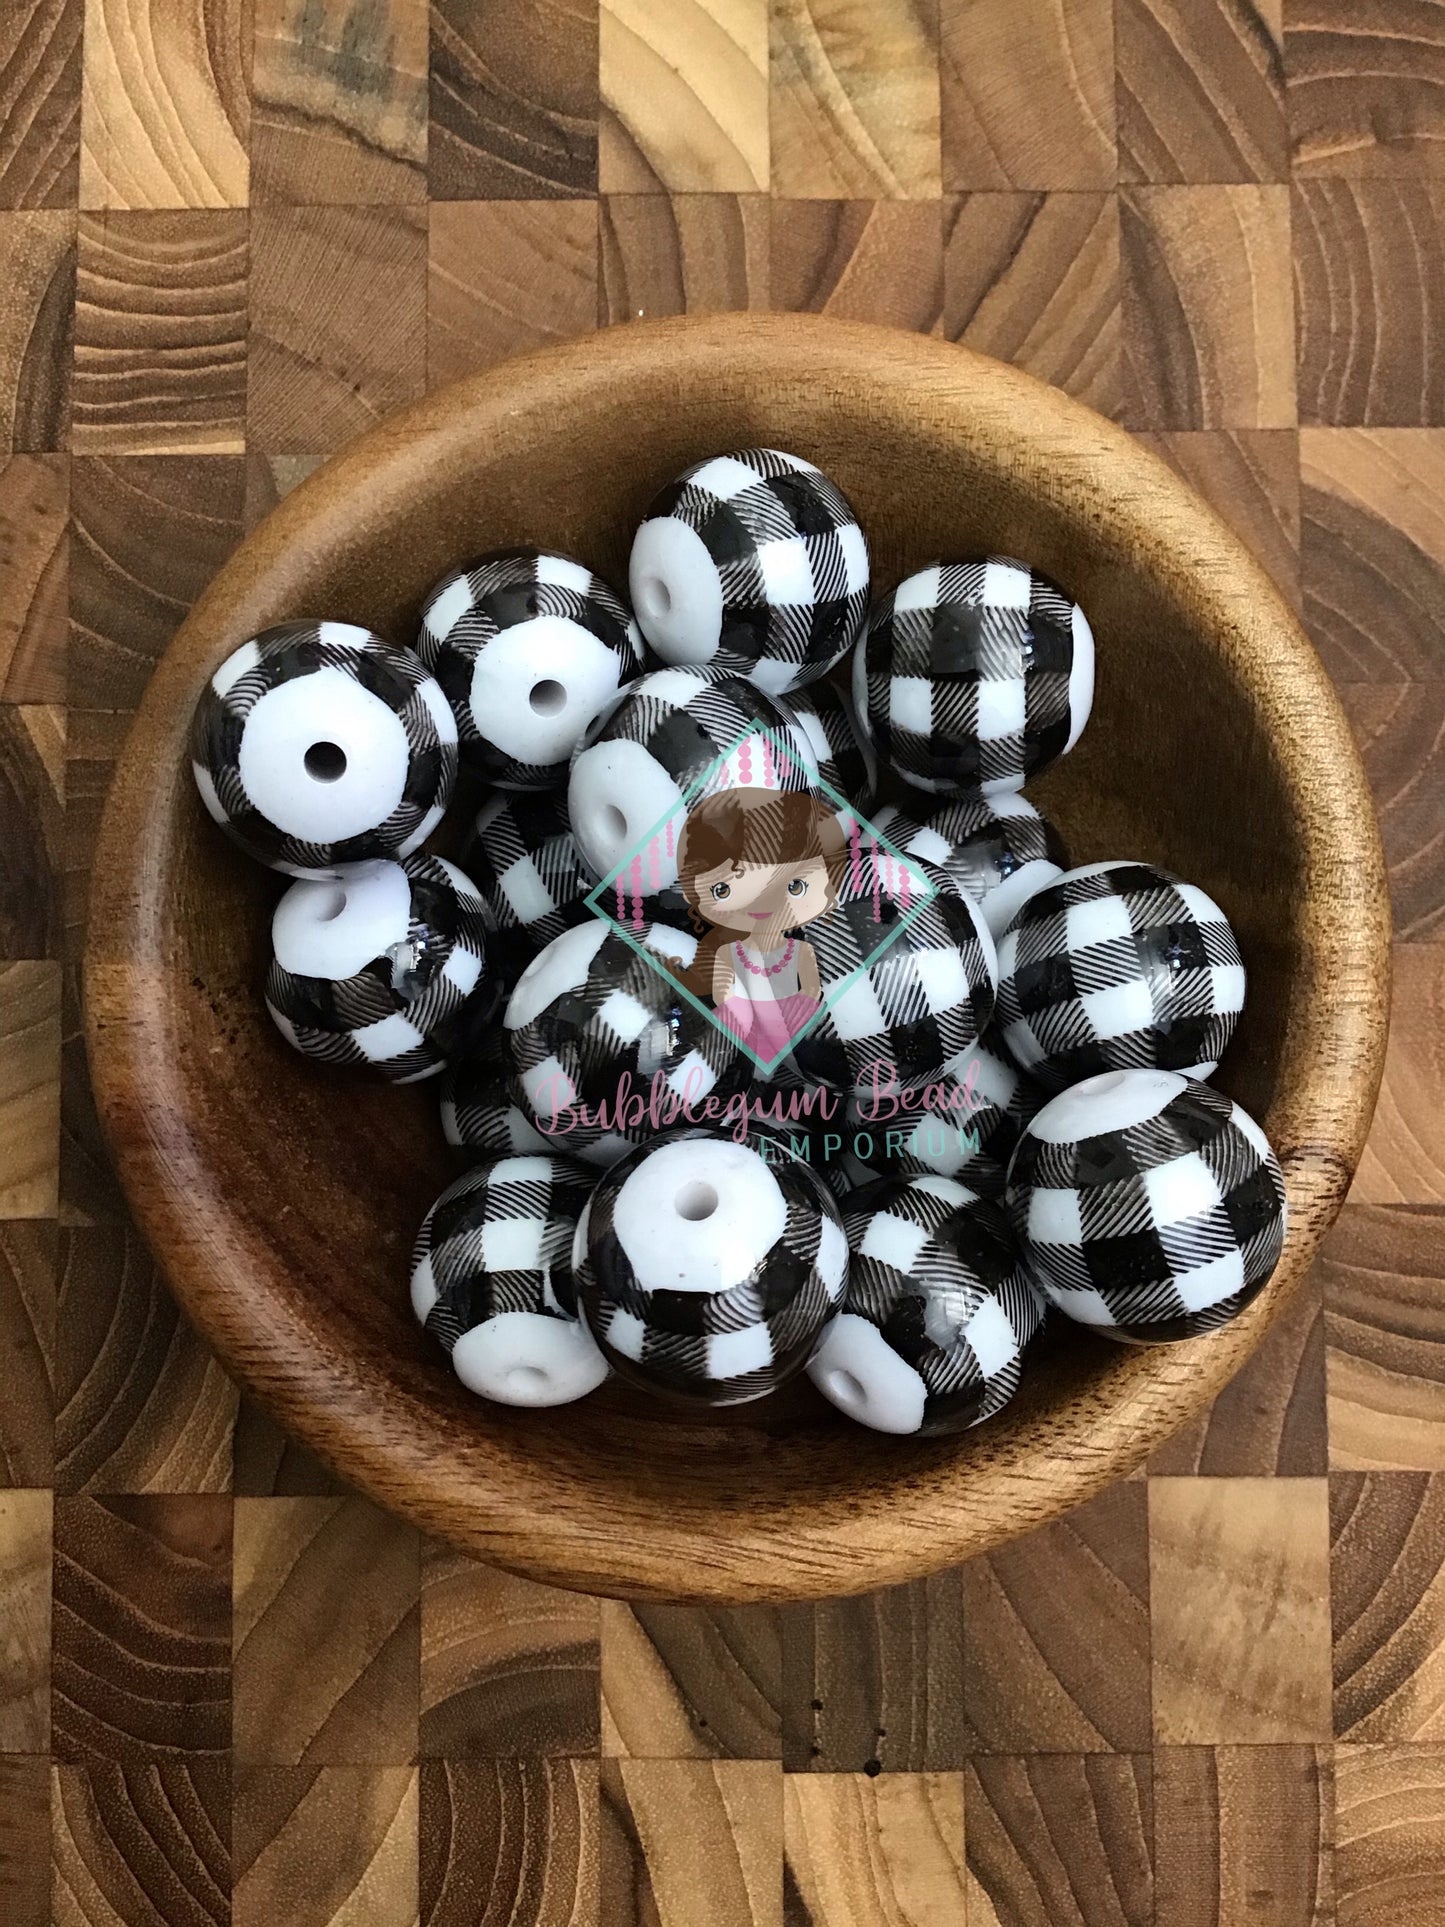 Black & White Houndstooth Patterned Beads